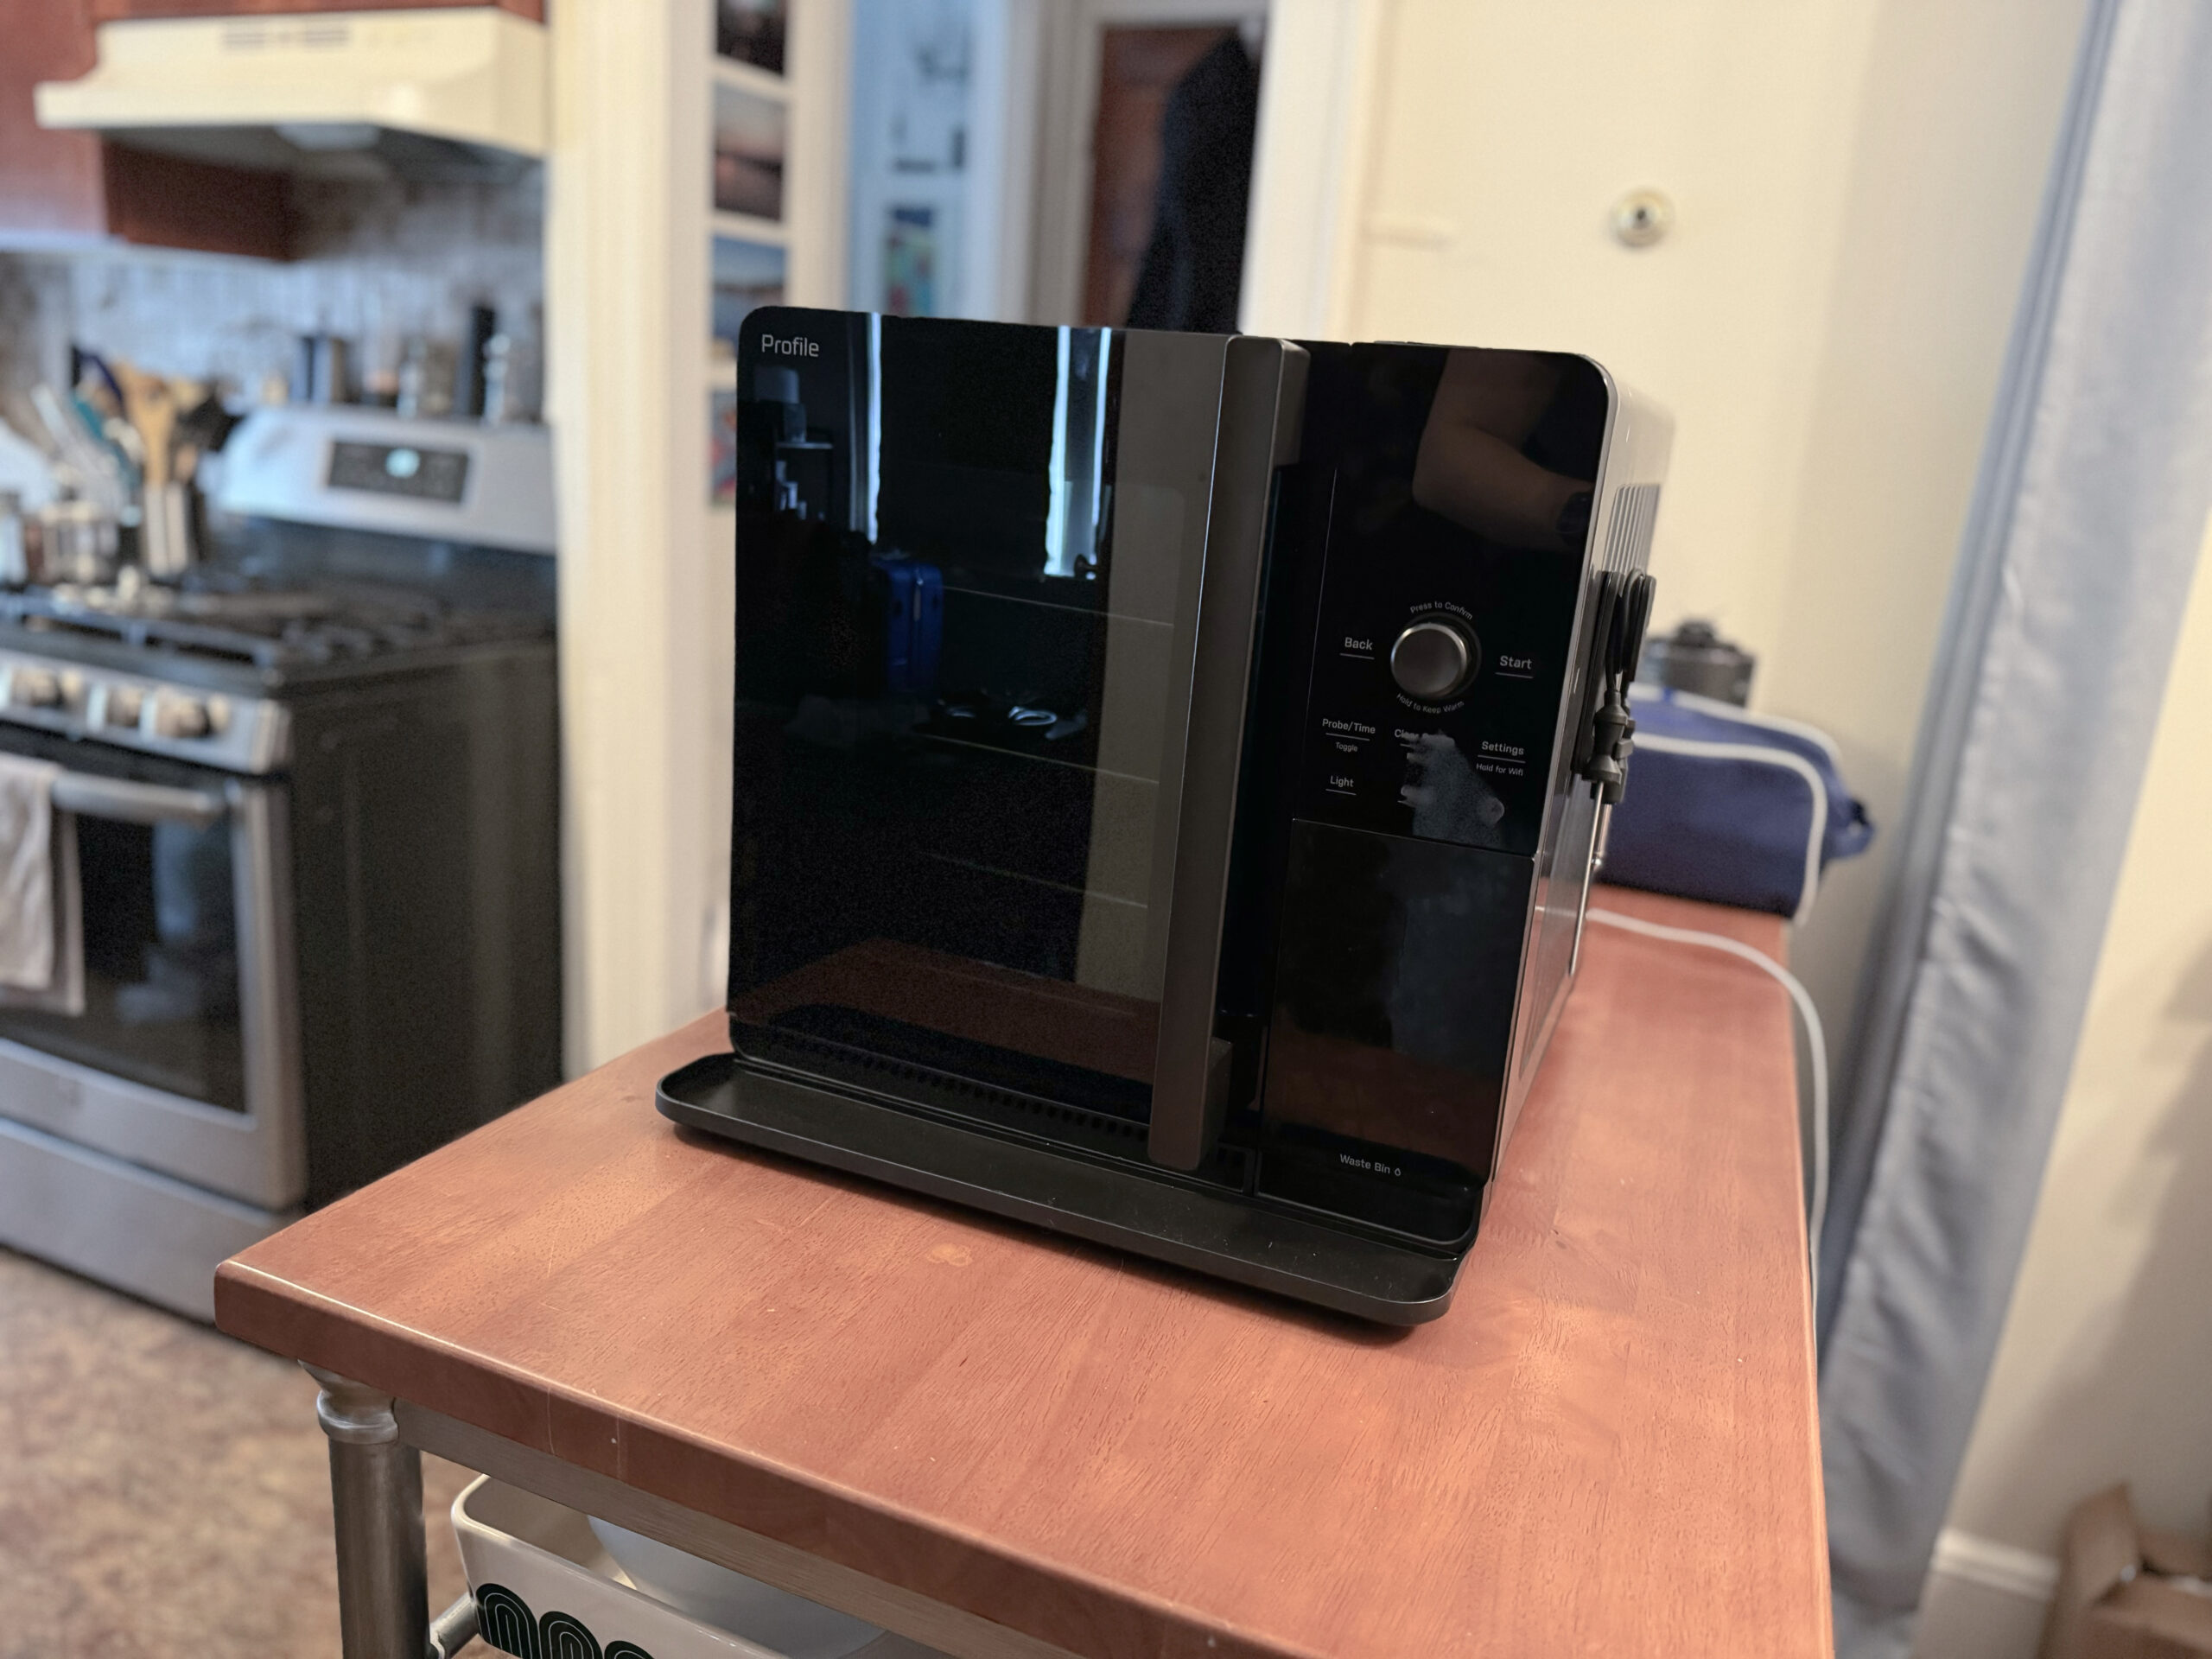 GE Profile Smart Indoor Smoker with Active Smoke Filtration, Precision  Smoke Control, 5 Smoke Settings, WiFi Connected, Electric, Wood Pellet BBQ